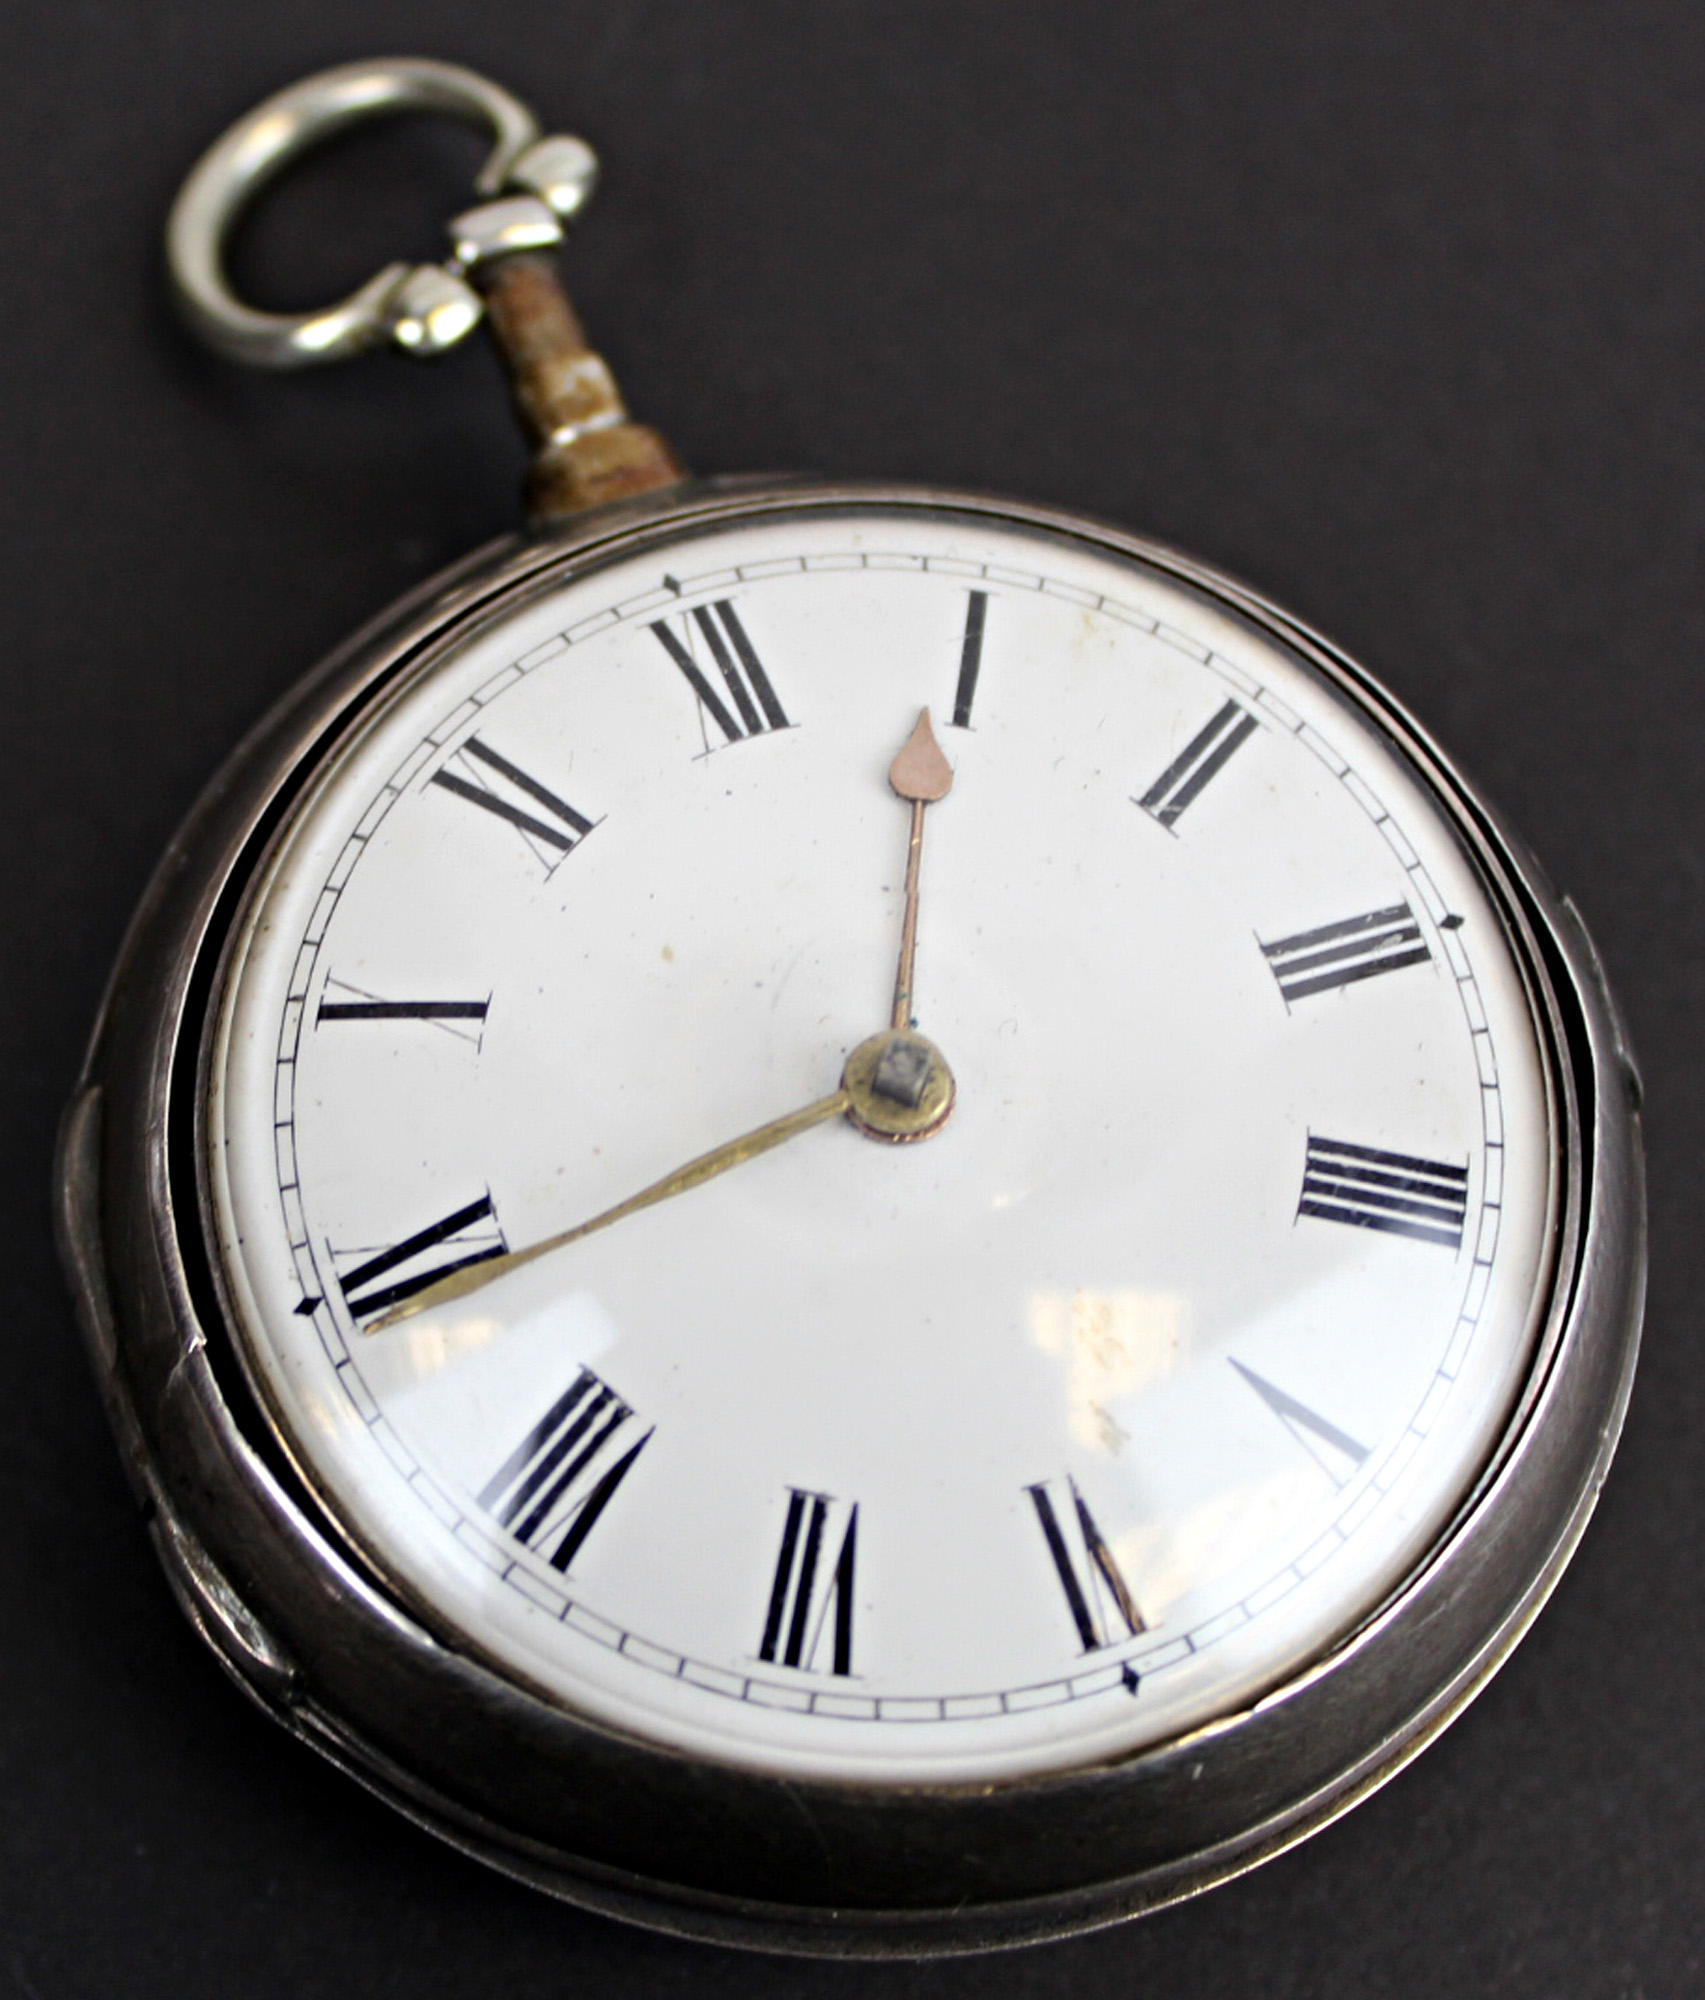 Silver pair cased George III pocket watch, both cases hallmarked London 1807, the movement signed J.